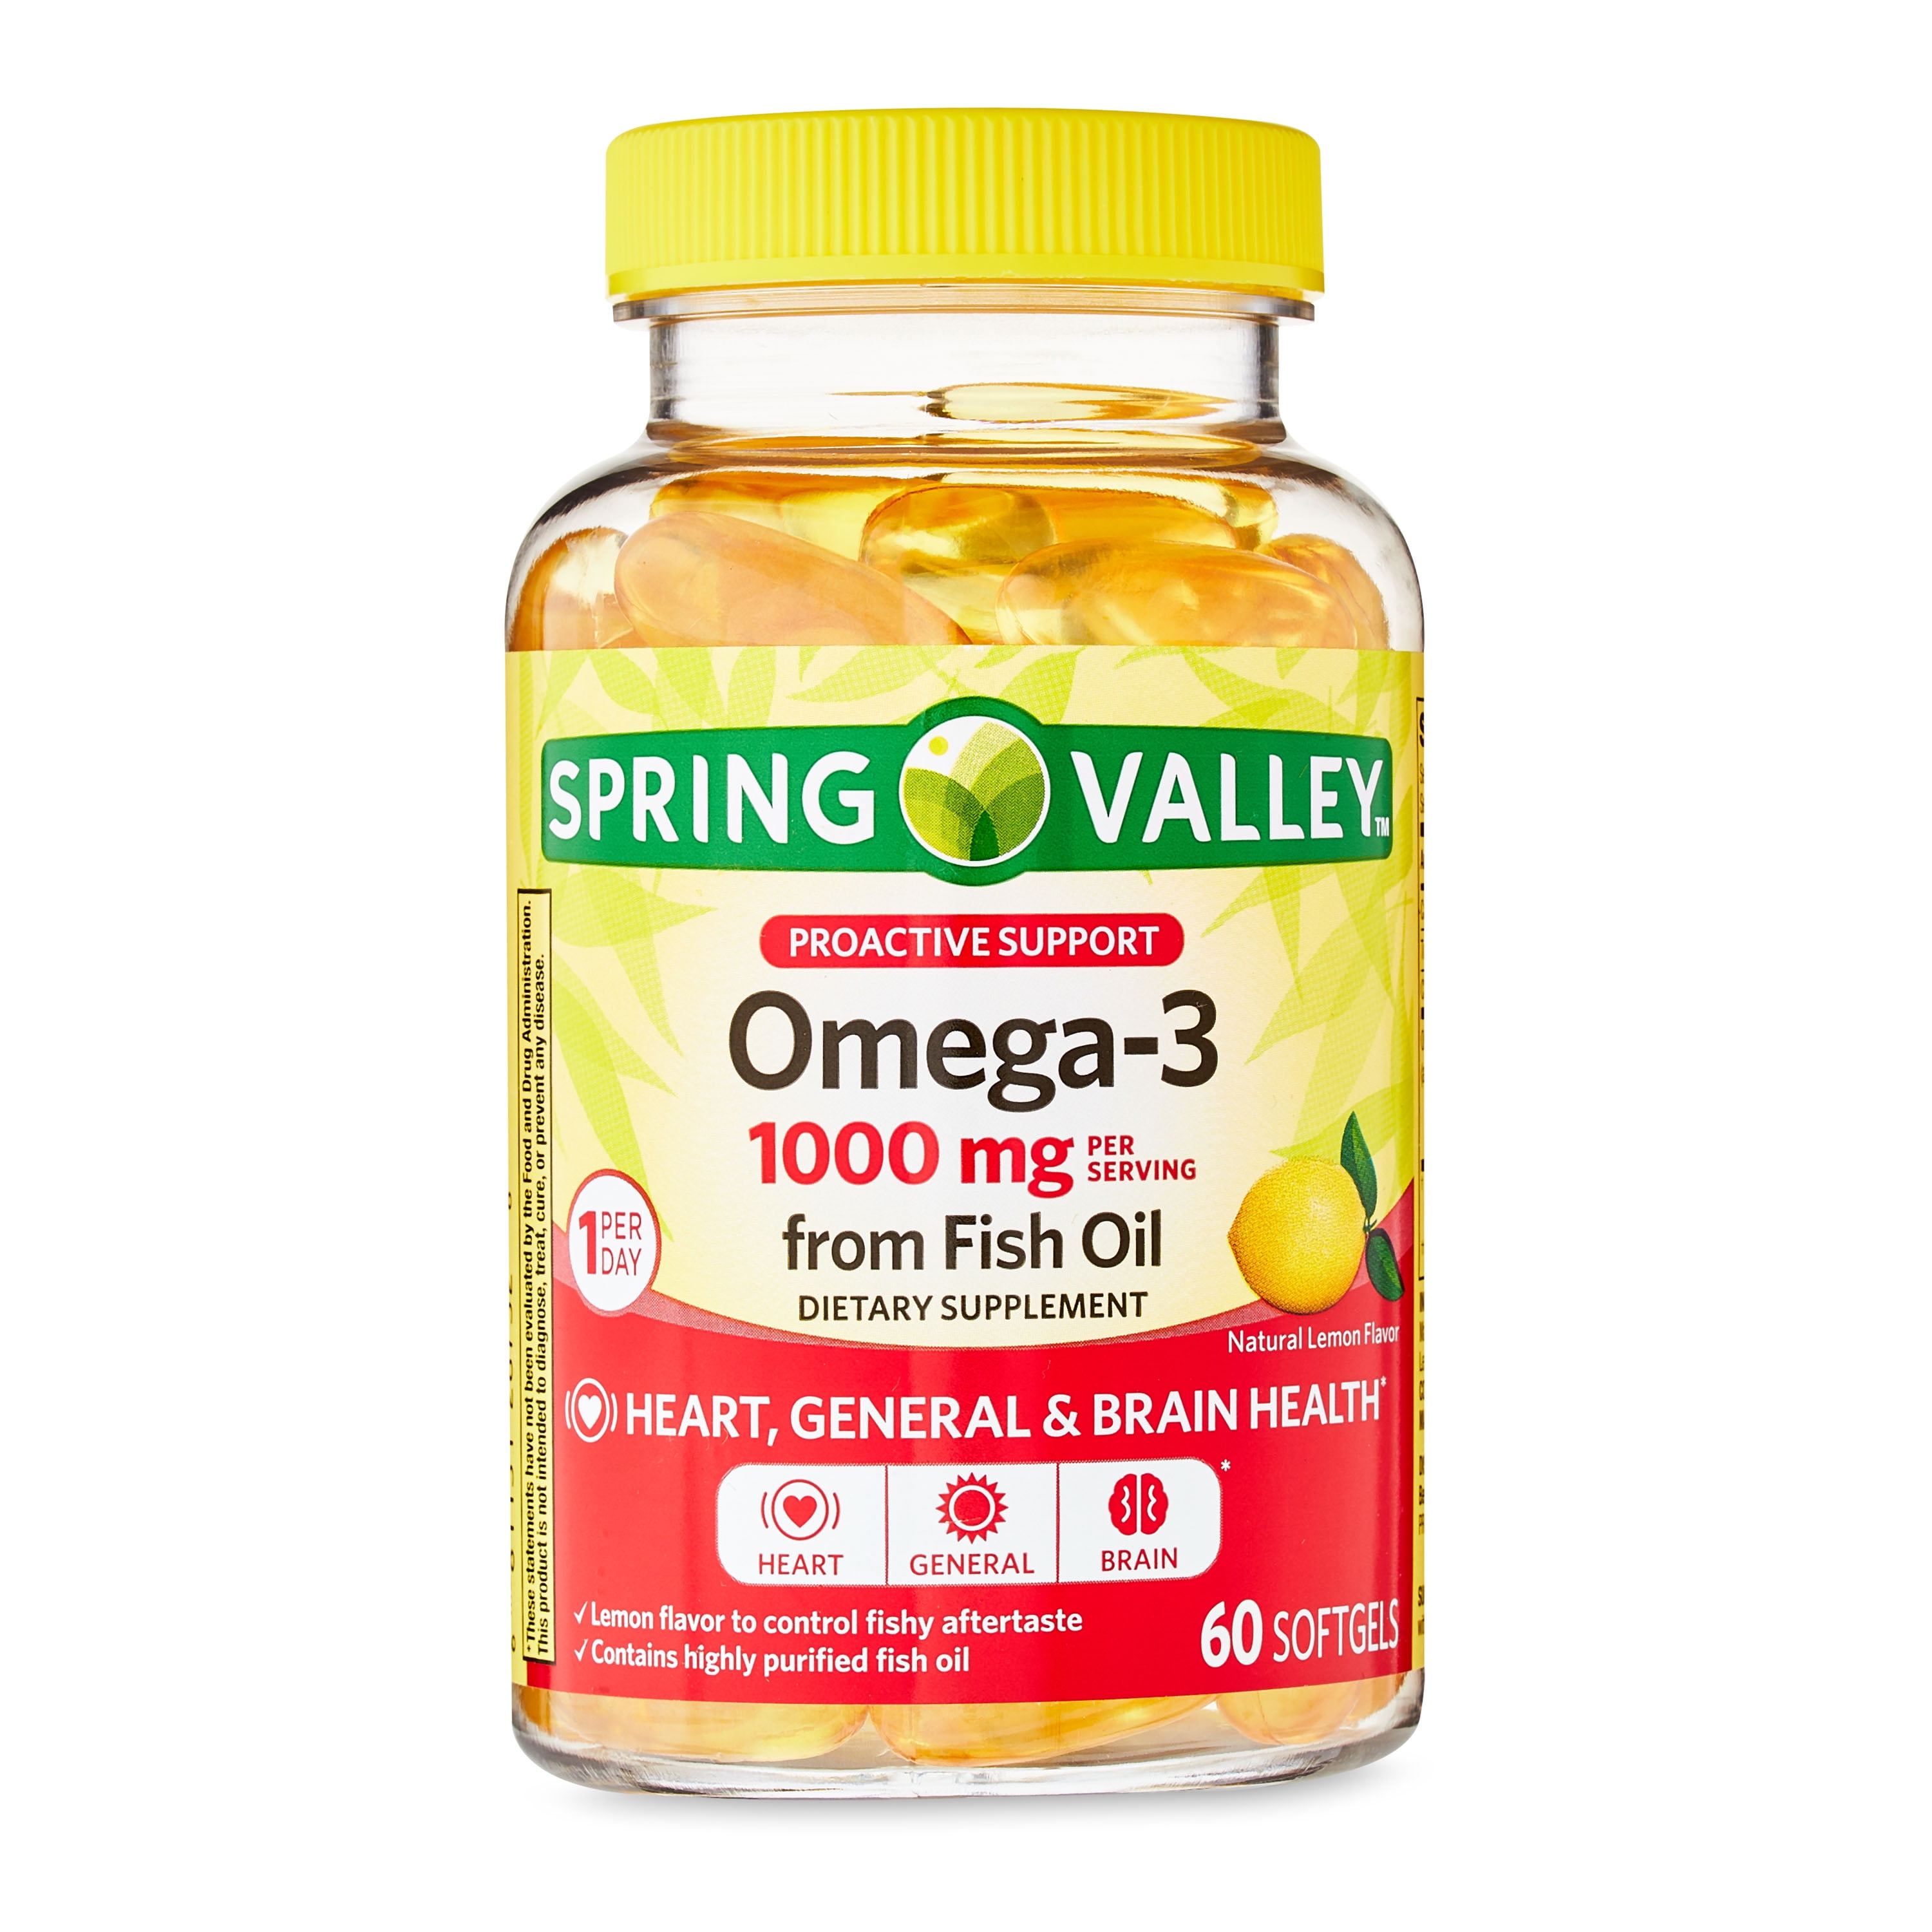 Spring Valley Proactive Support Omega-3 from Fish Oil Dietary Supplement, 1000 mg, 60 count